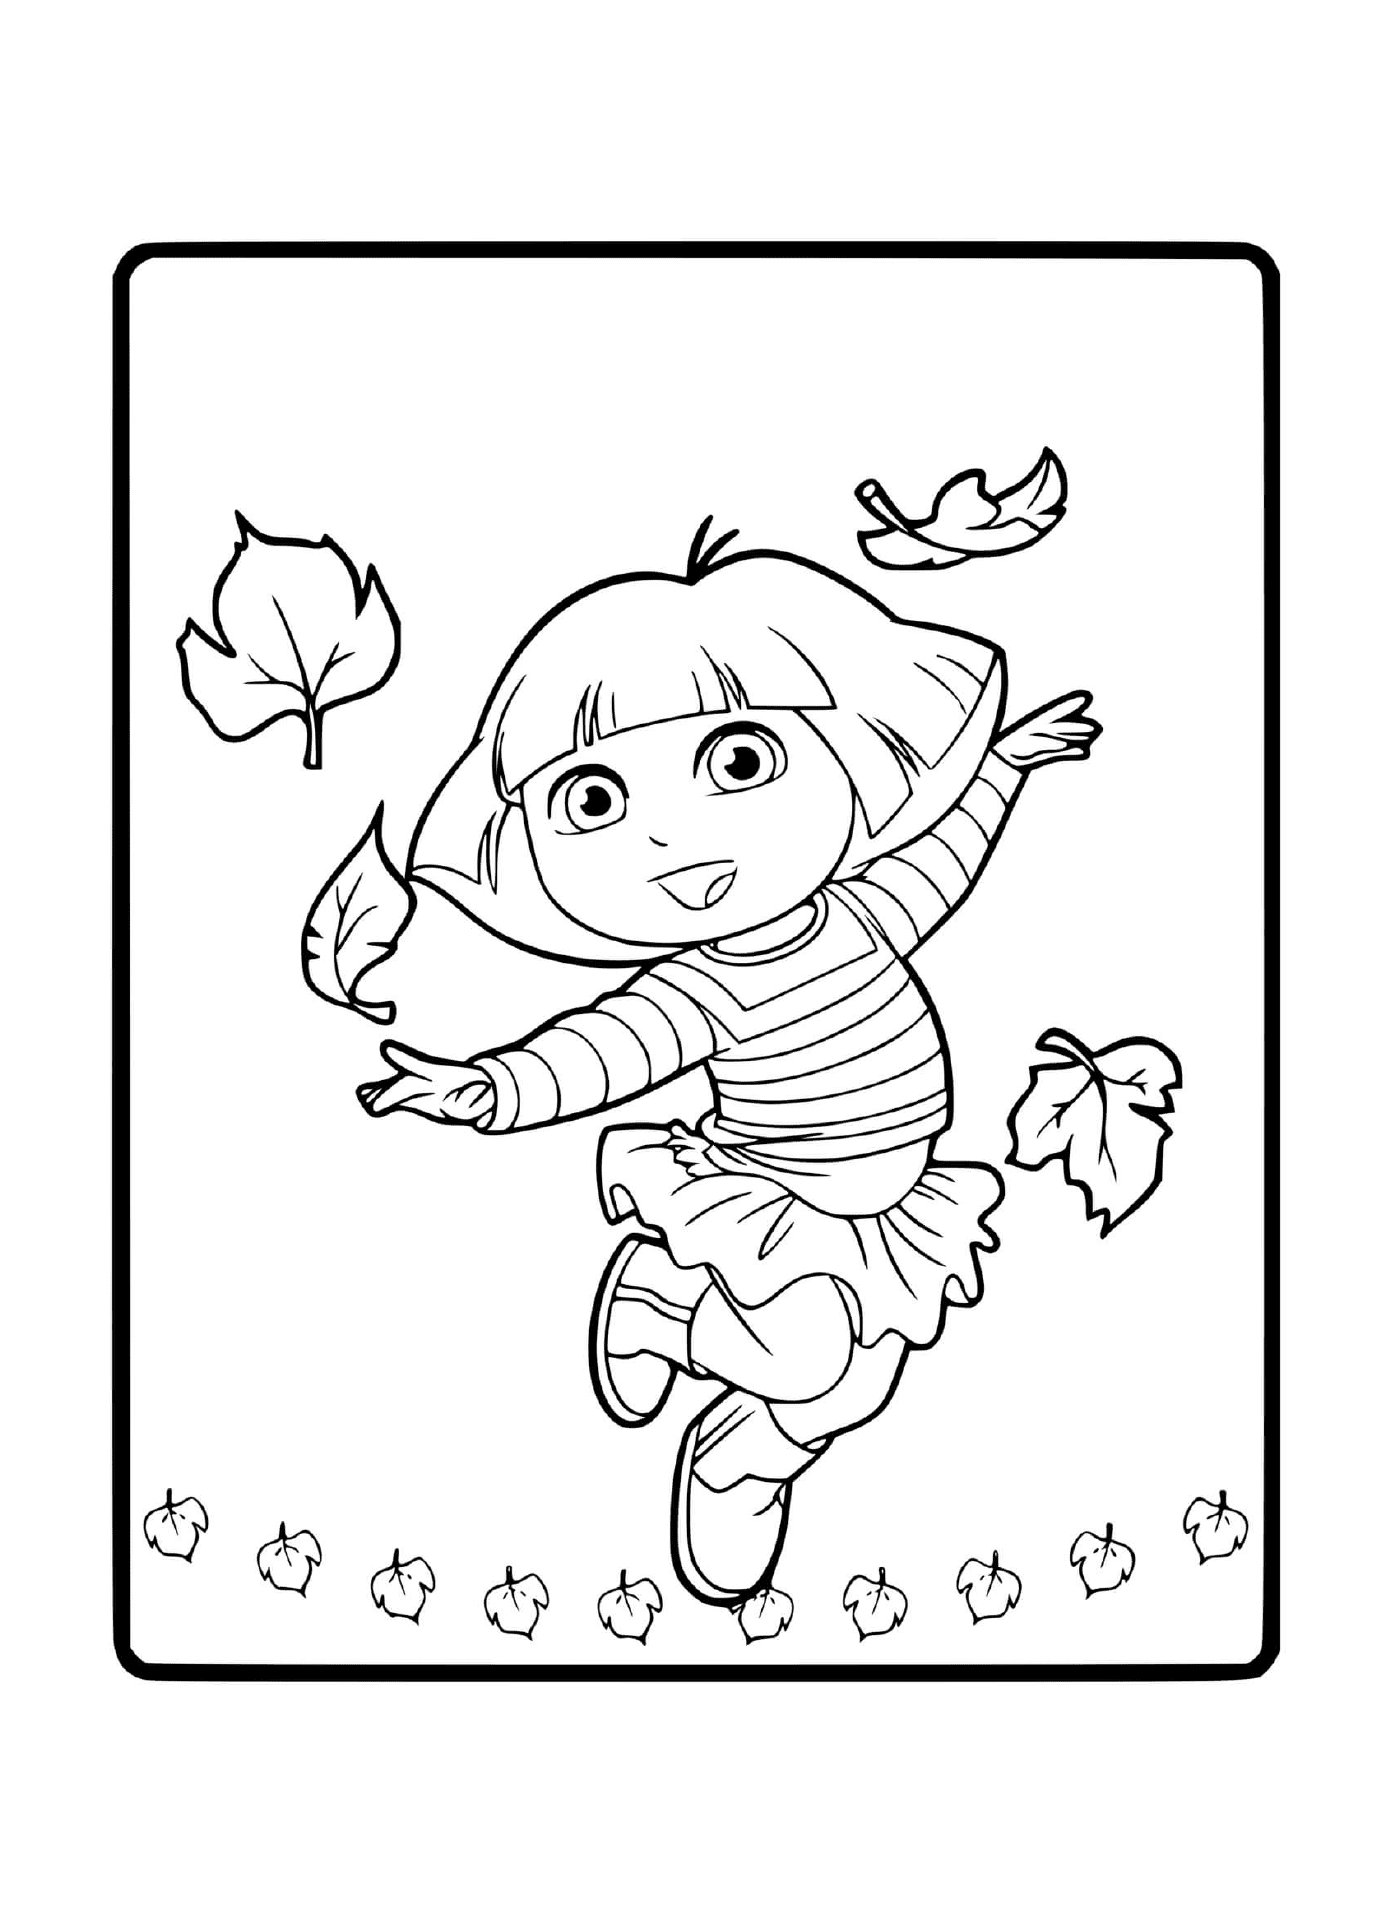  Dora has fun with the autumn leaves 